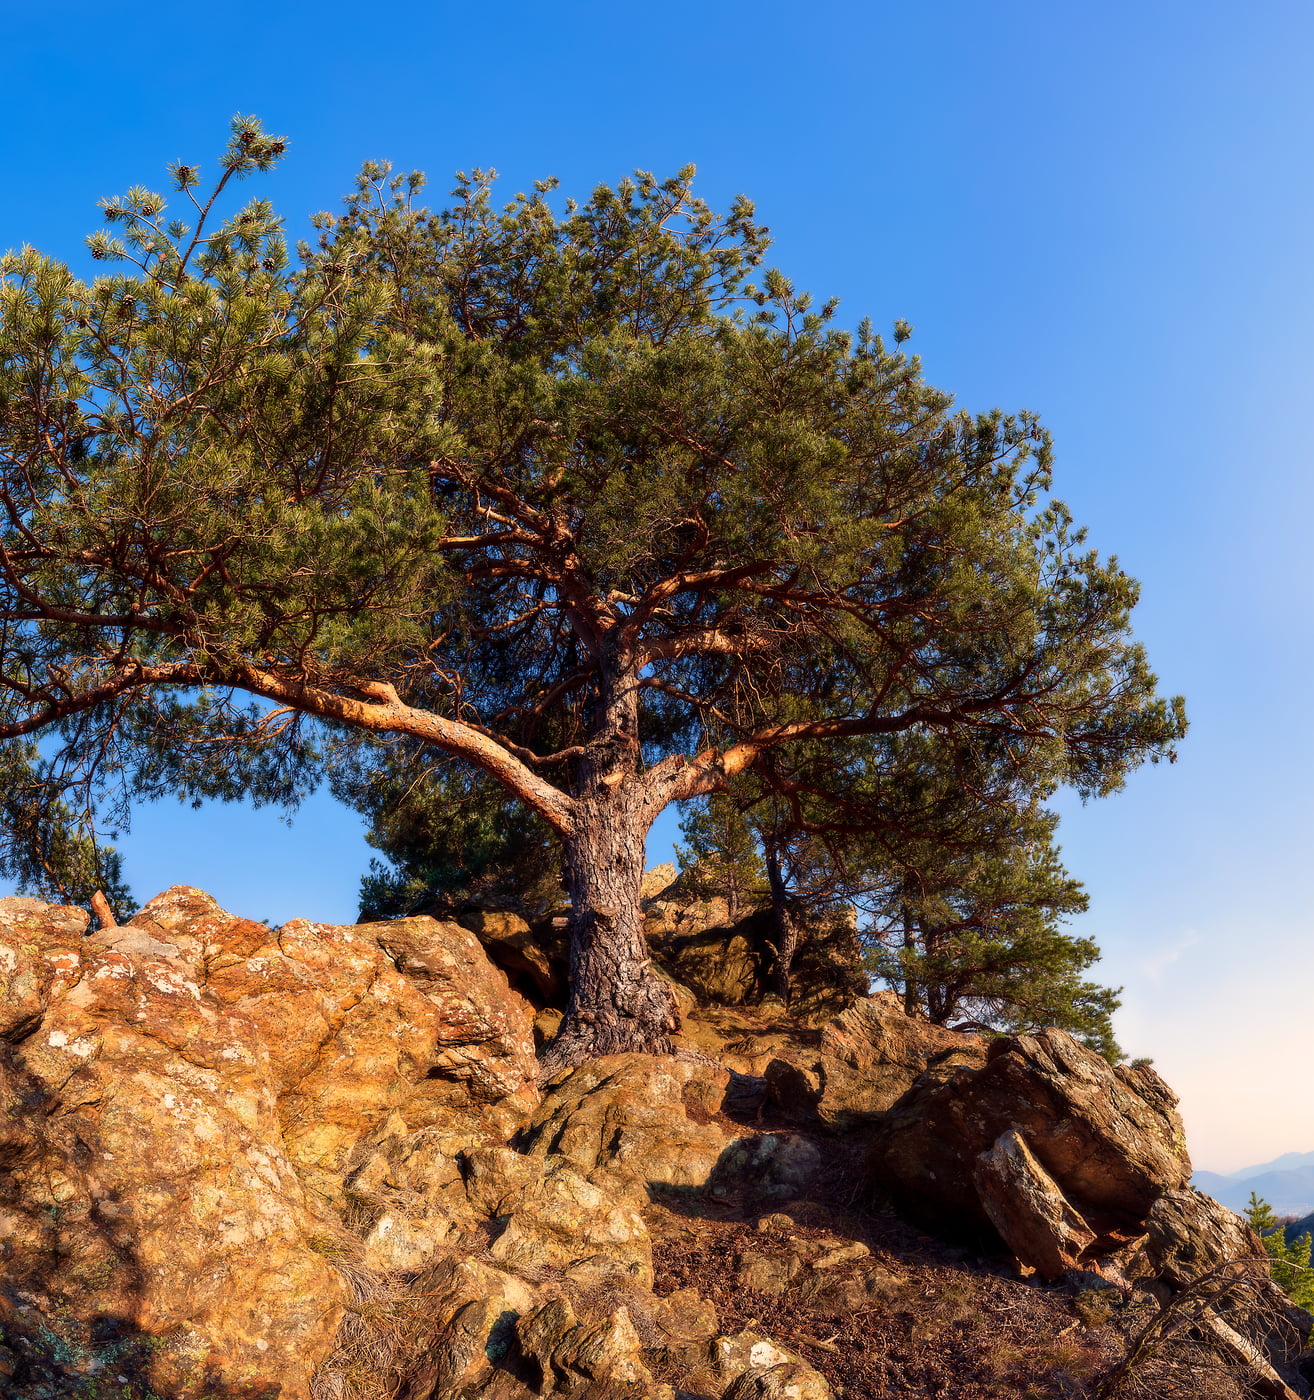 378 megapixels! A very high resolution, large-format VAST photo print of a pine tree on rocks; nature photograph created by Duilio Fiorille in Valgioie, Piedmont, Italy